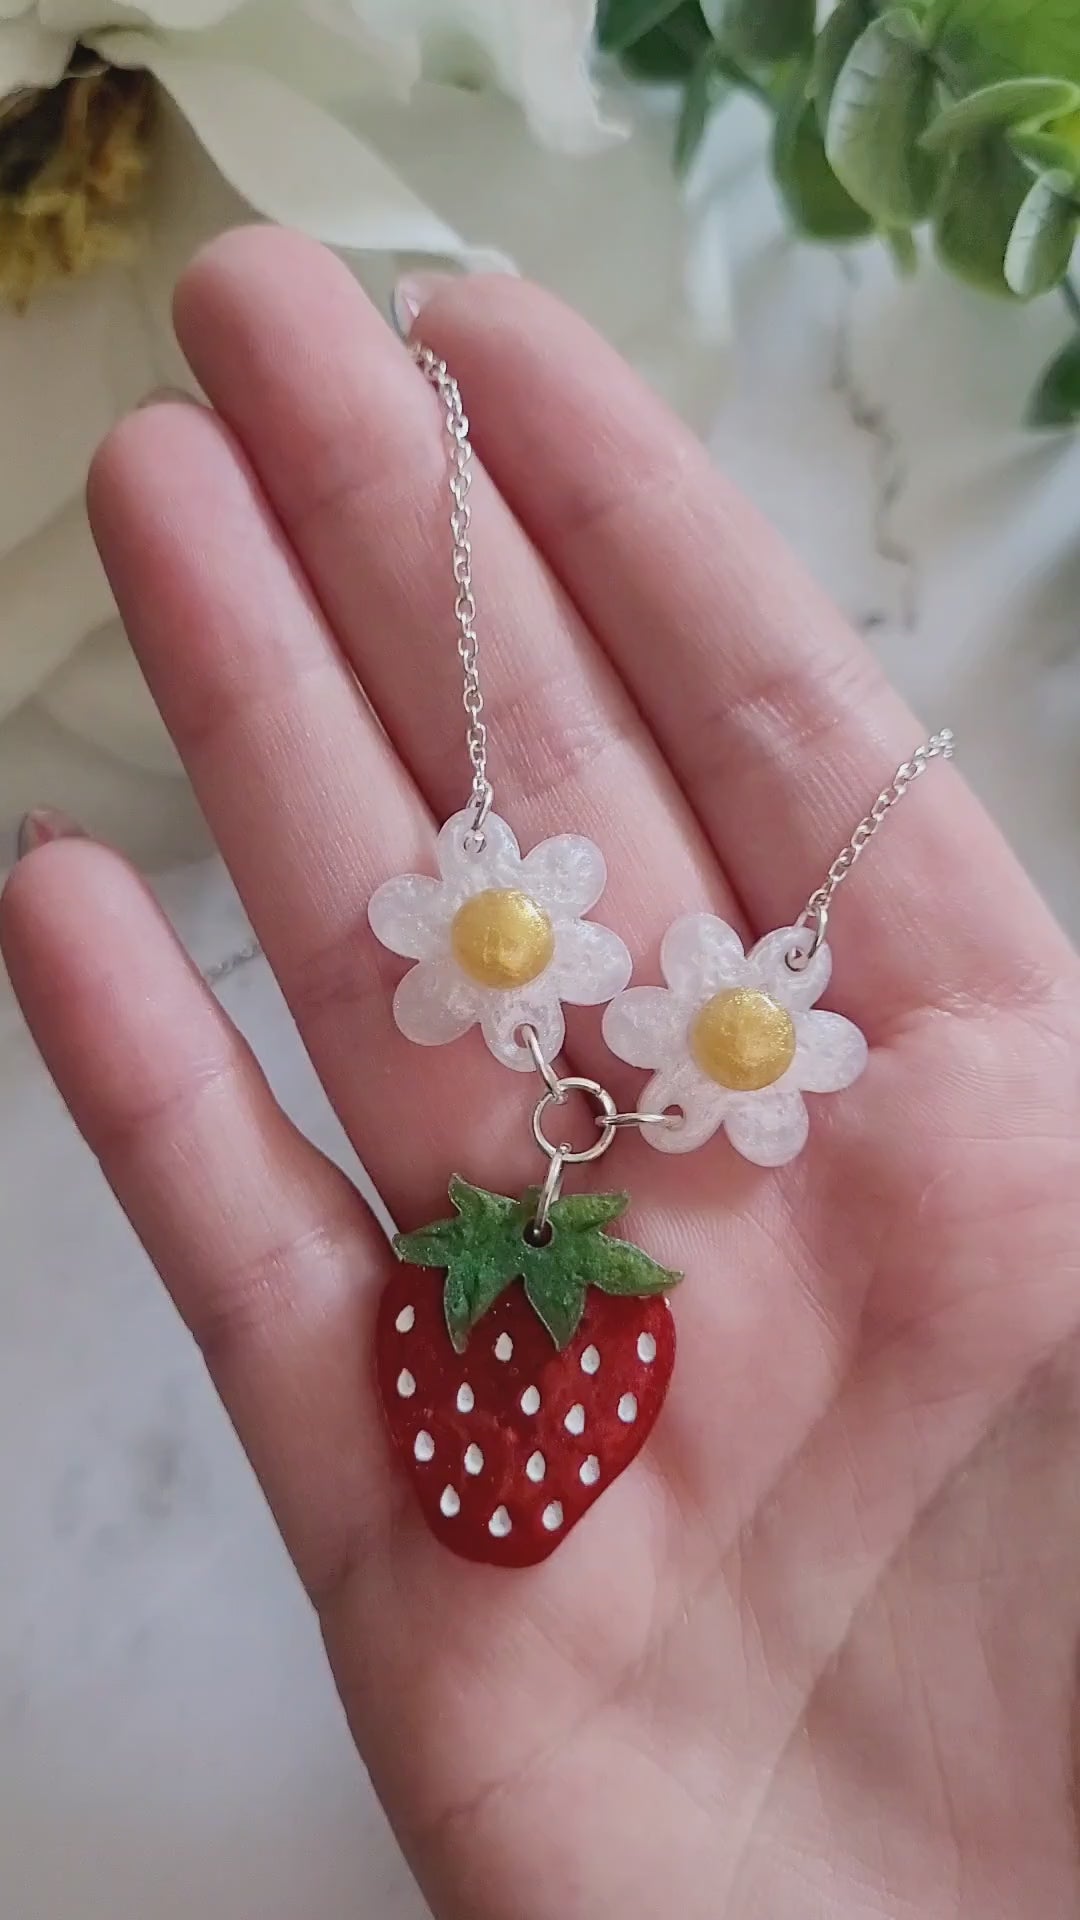 video close up of Resin Strawberry and flower necklace on a marble background surrounded by foliage.